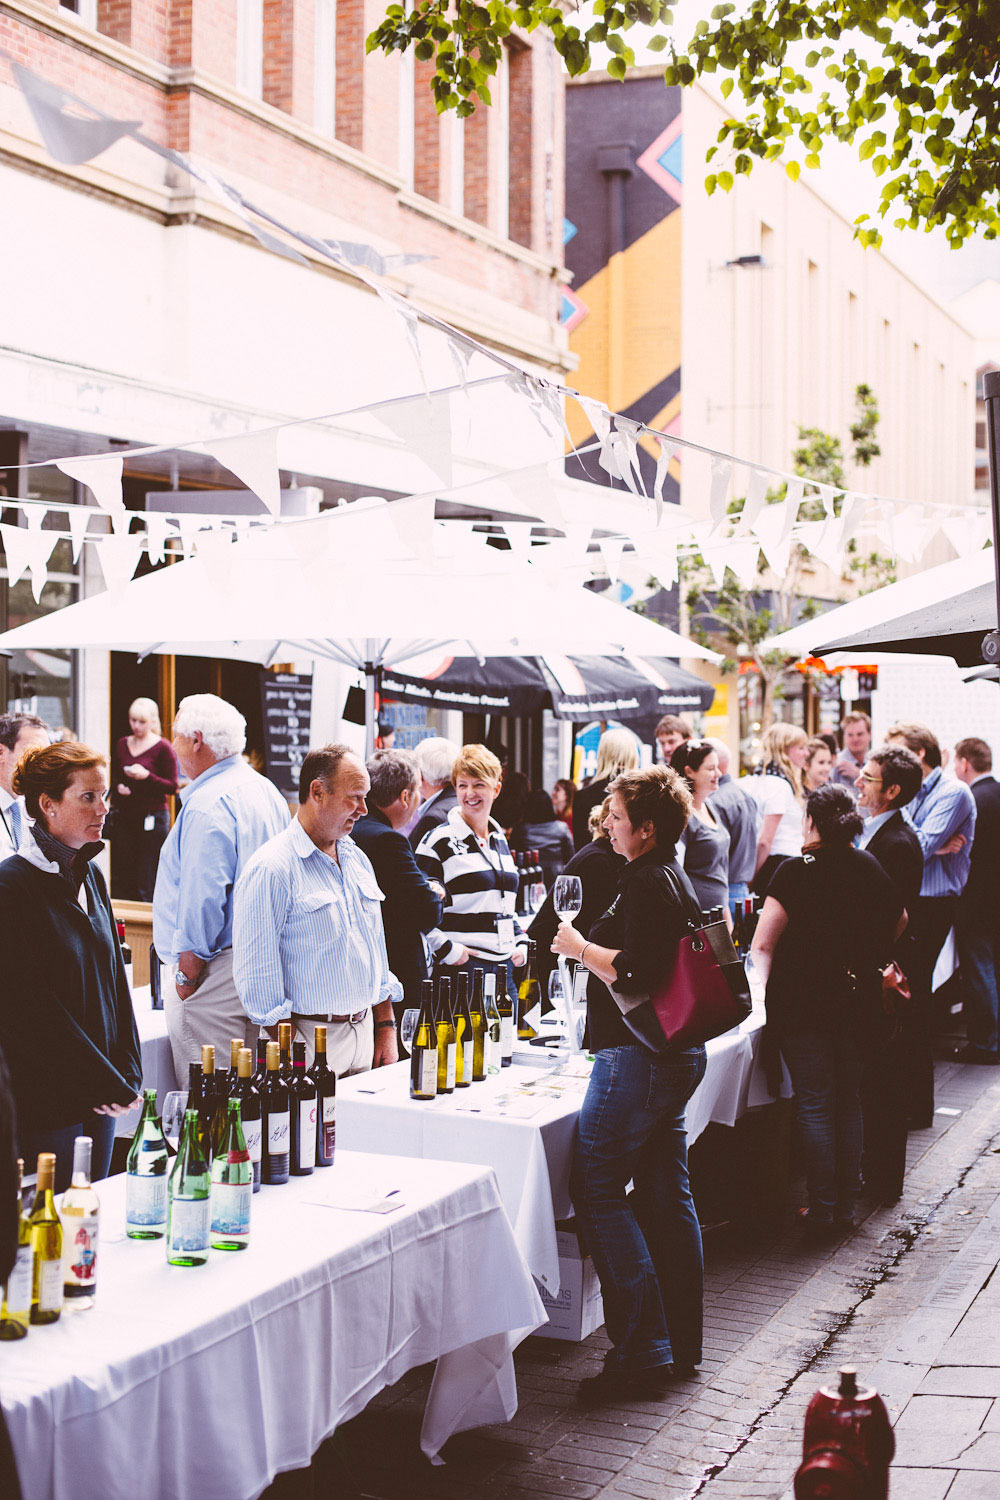 The Peel Street tasting will be similar to this event, held in Leigh Street earlier this year.